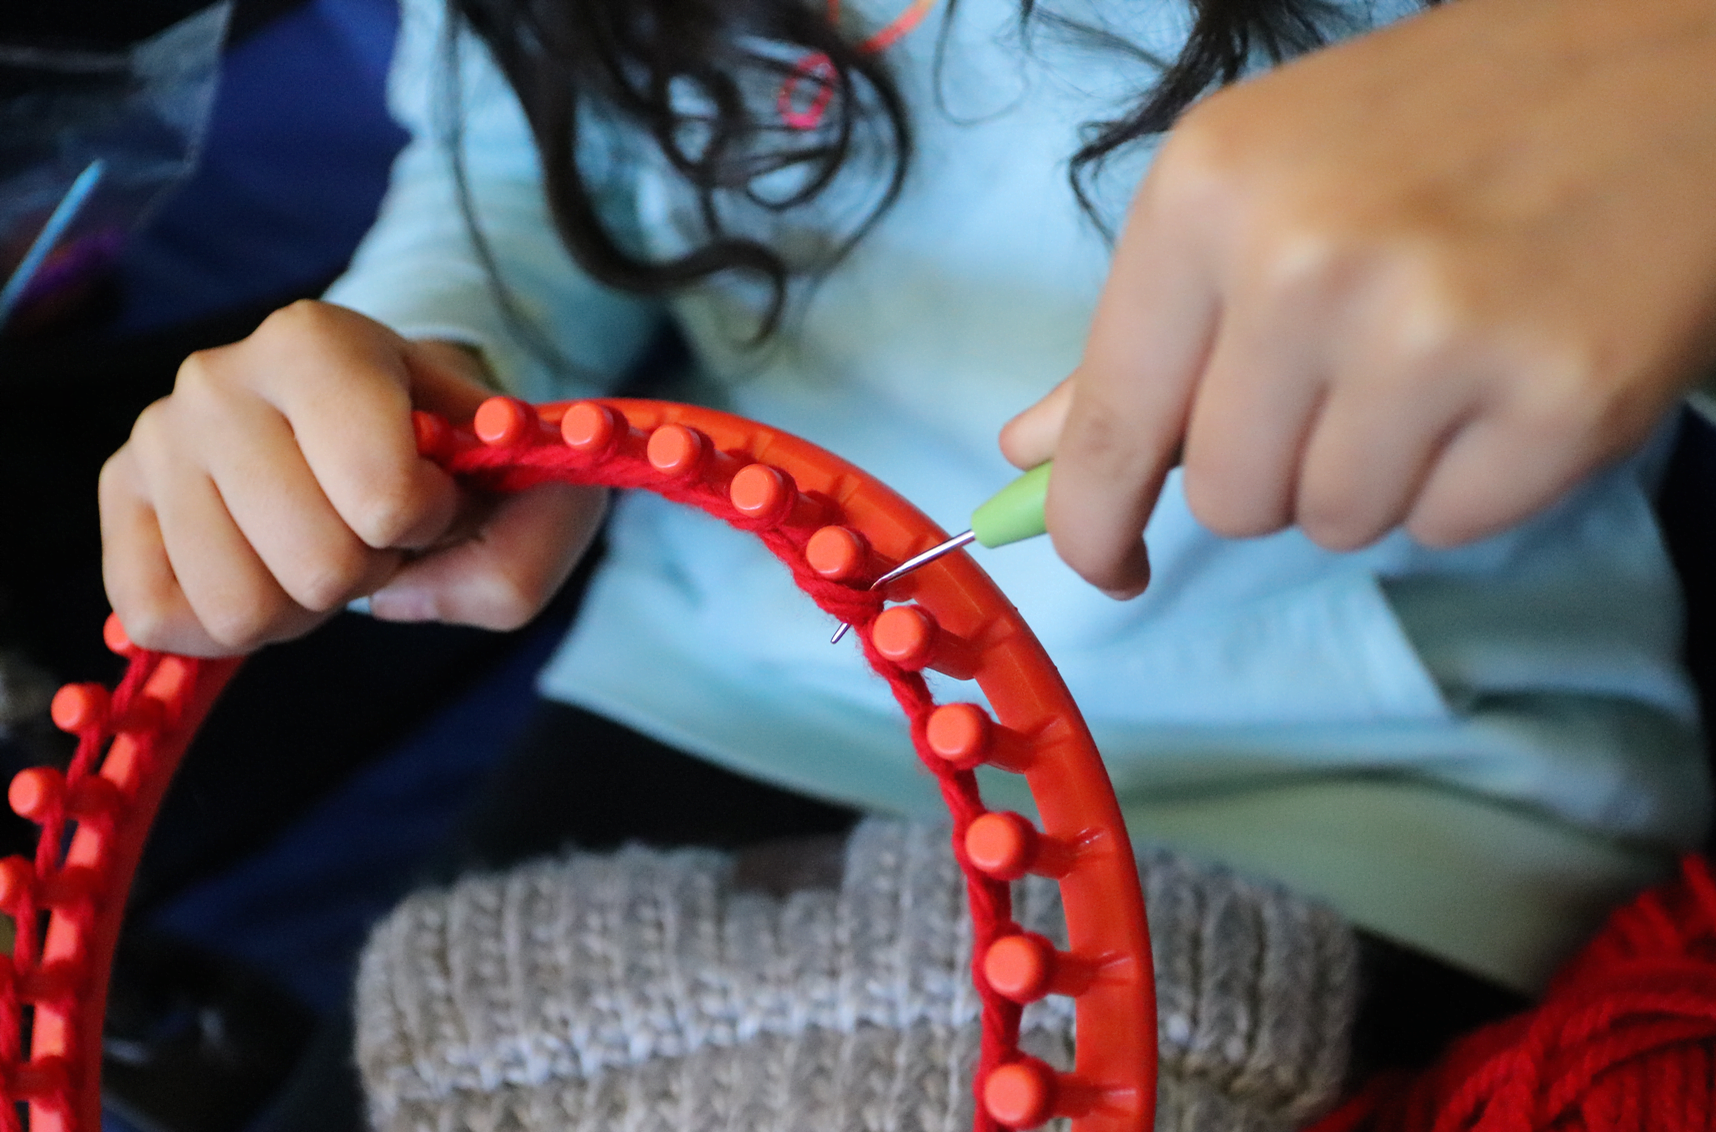 Katelyn Bae gets started on making a red hat using a circular loom. Feb 21, 2020 Photo: Leslie Yager